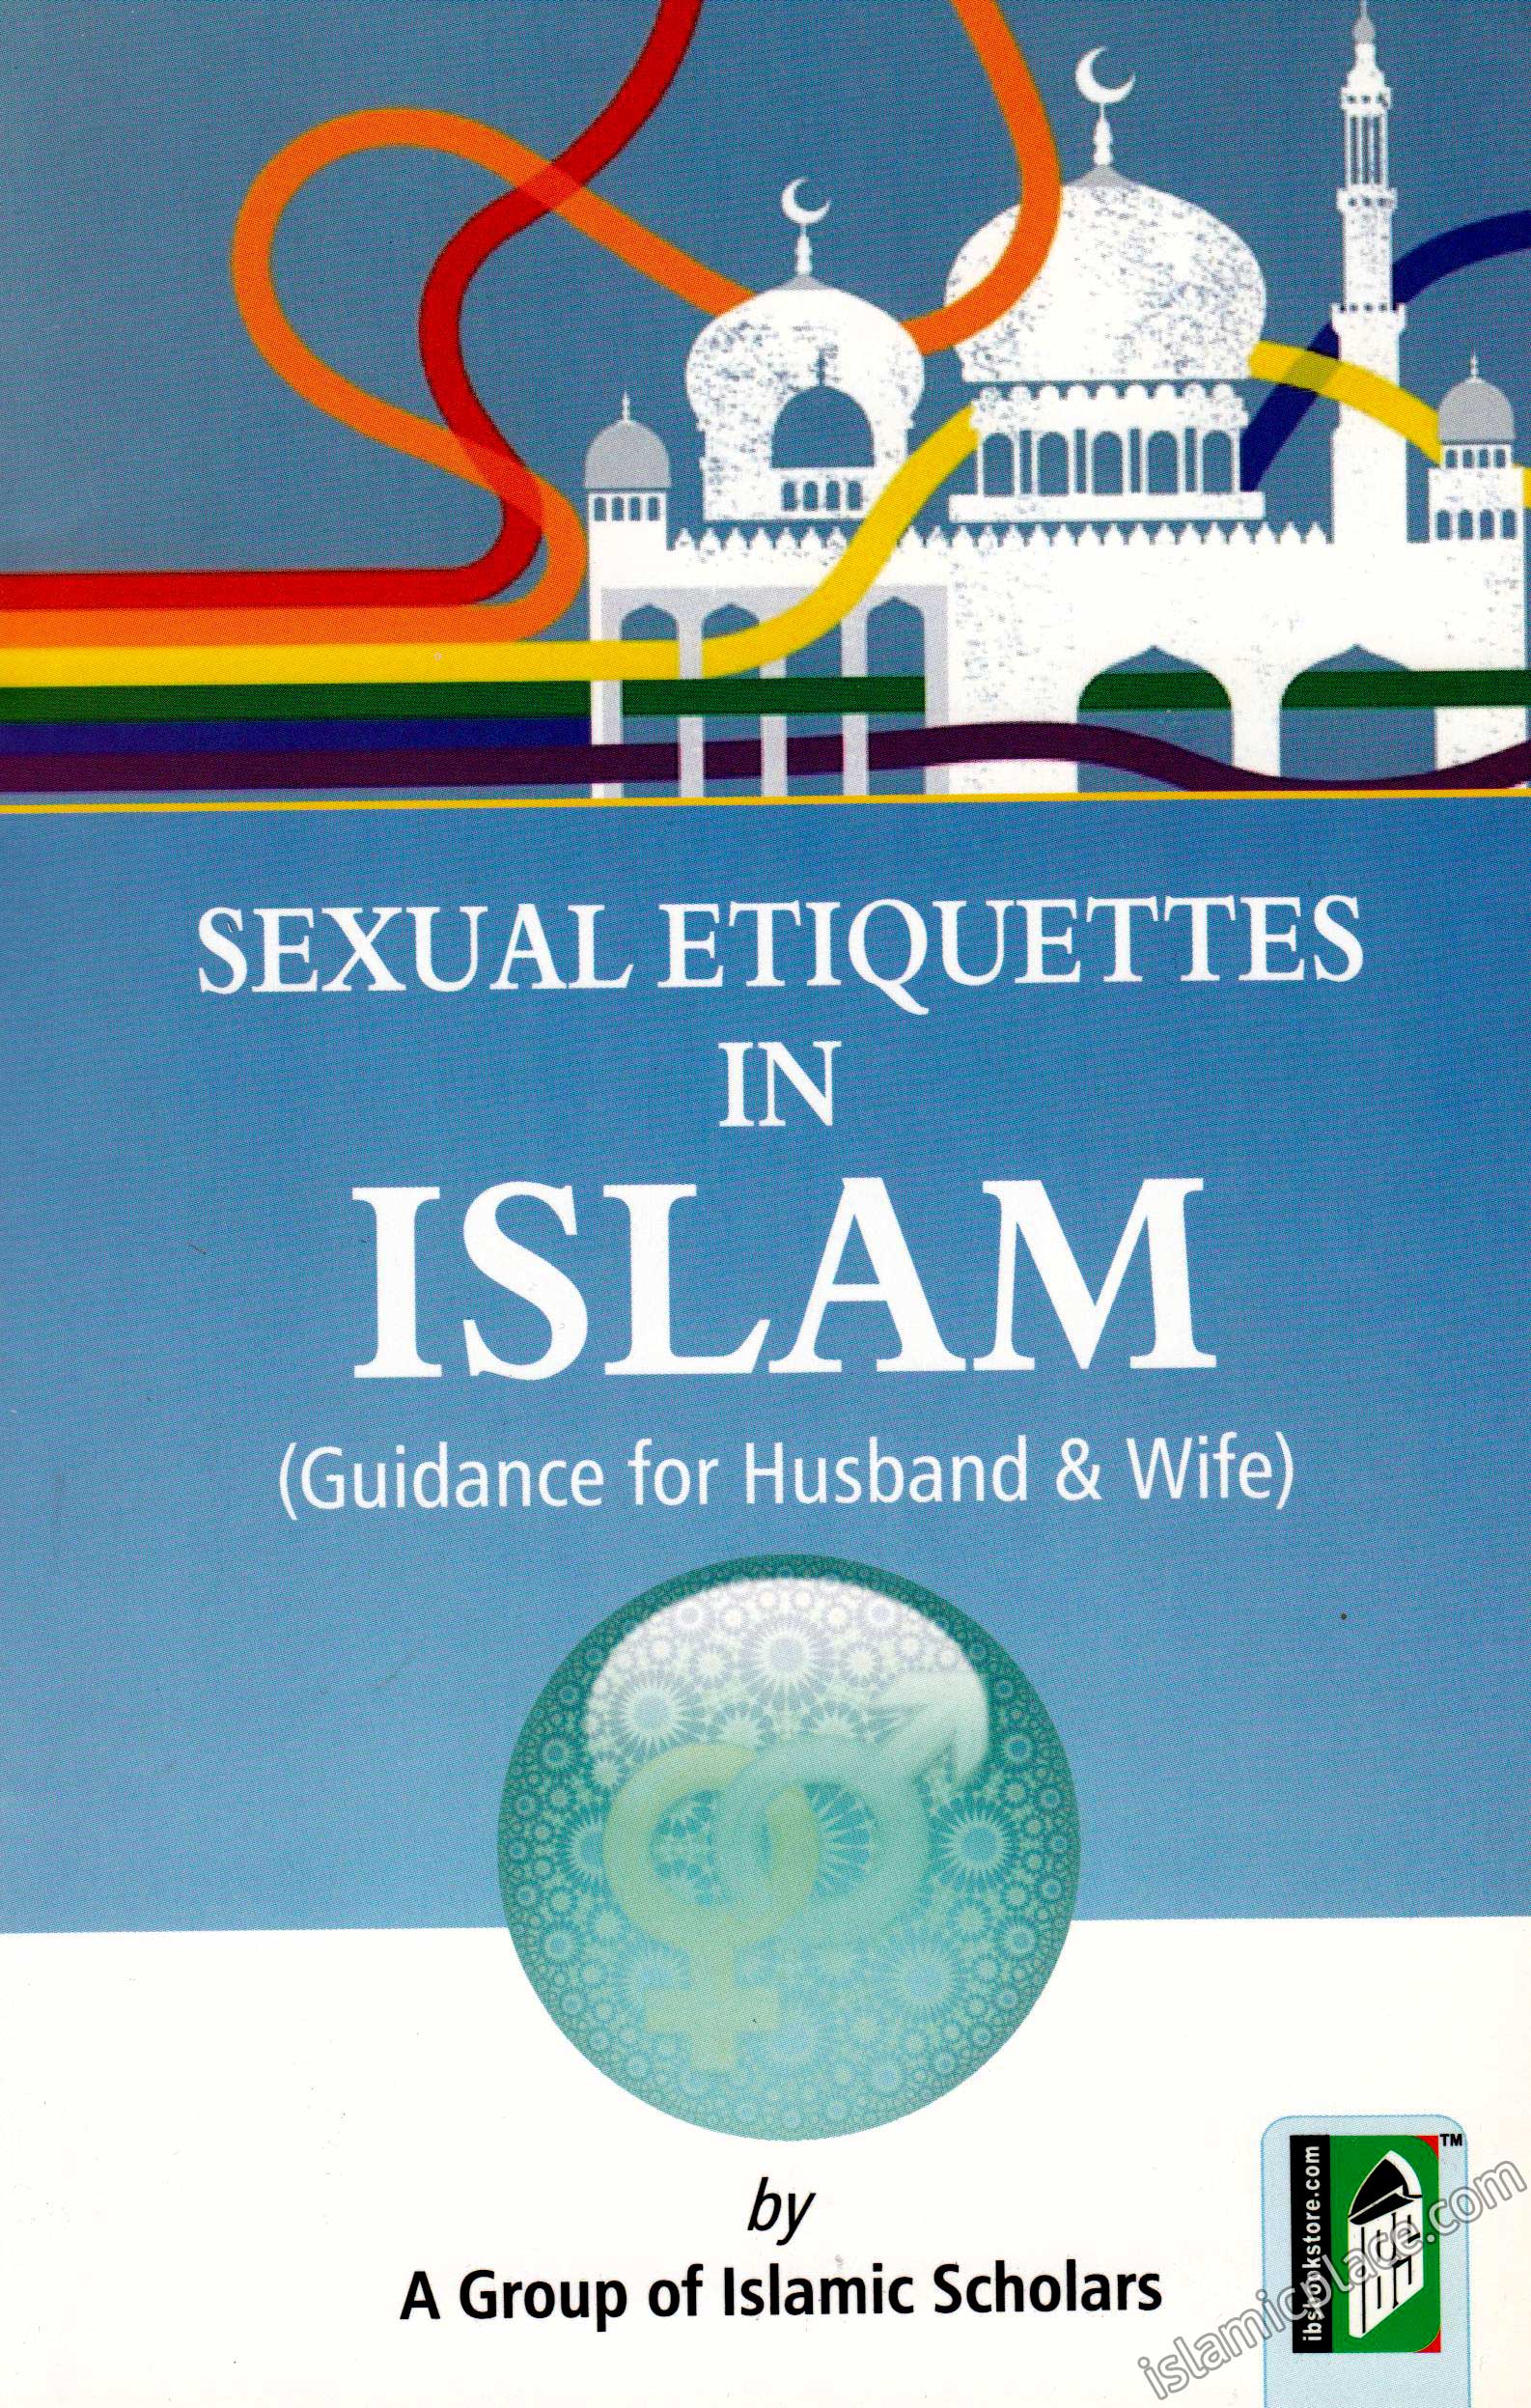 Sexual Etiquettes in Islam (Guidance for Husband and Wife)